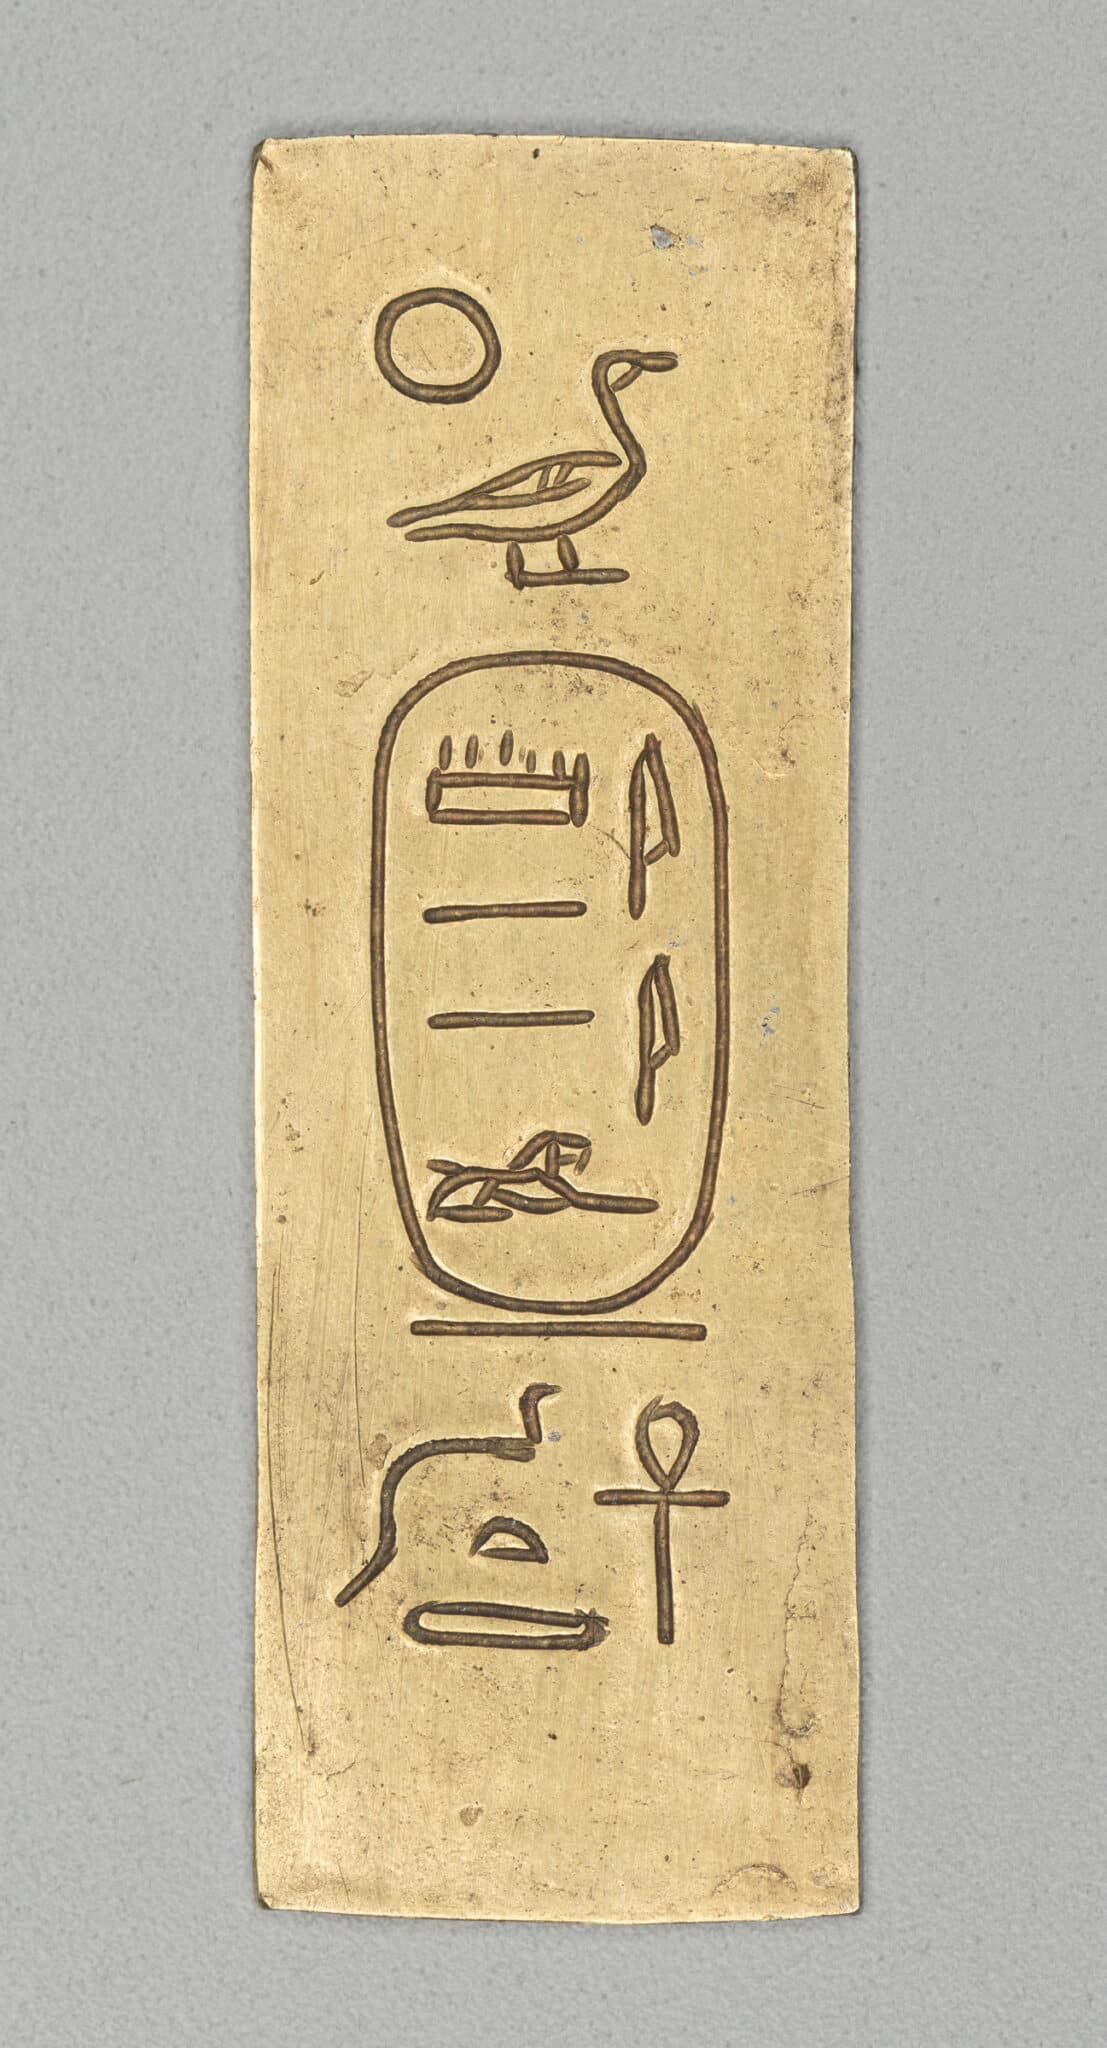 “Ancient Nubia: Art of the 25th Dynasty" from the Collection of the Museum of Fine Arts, Boston